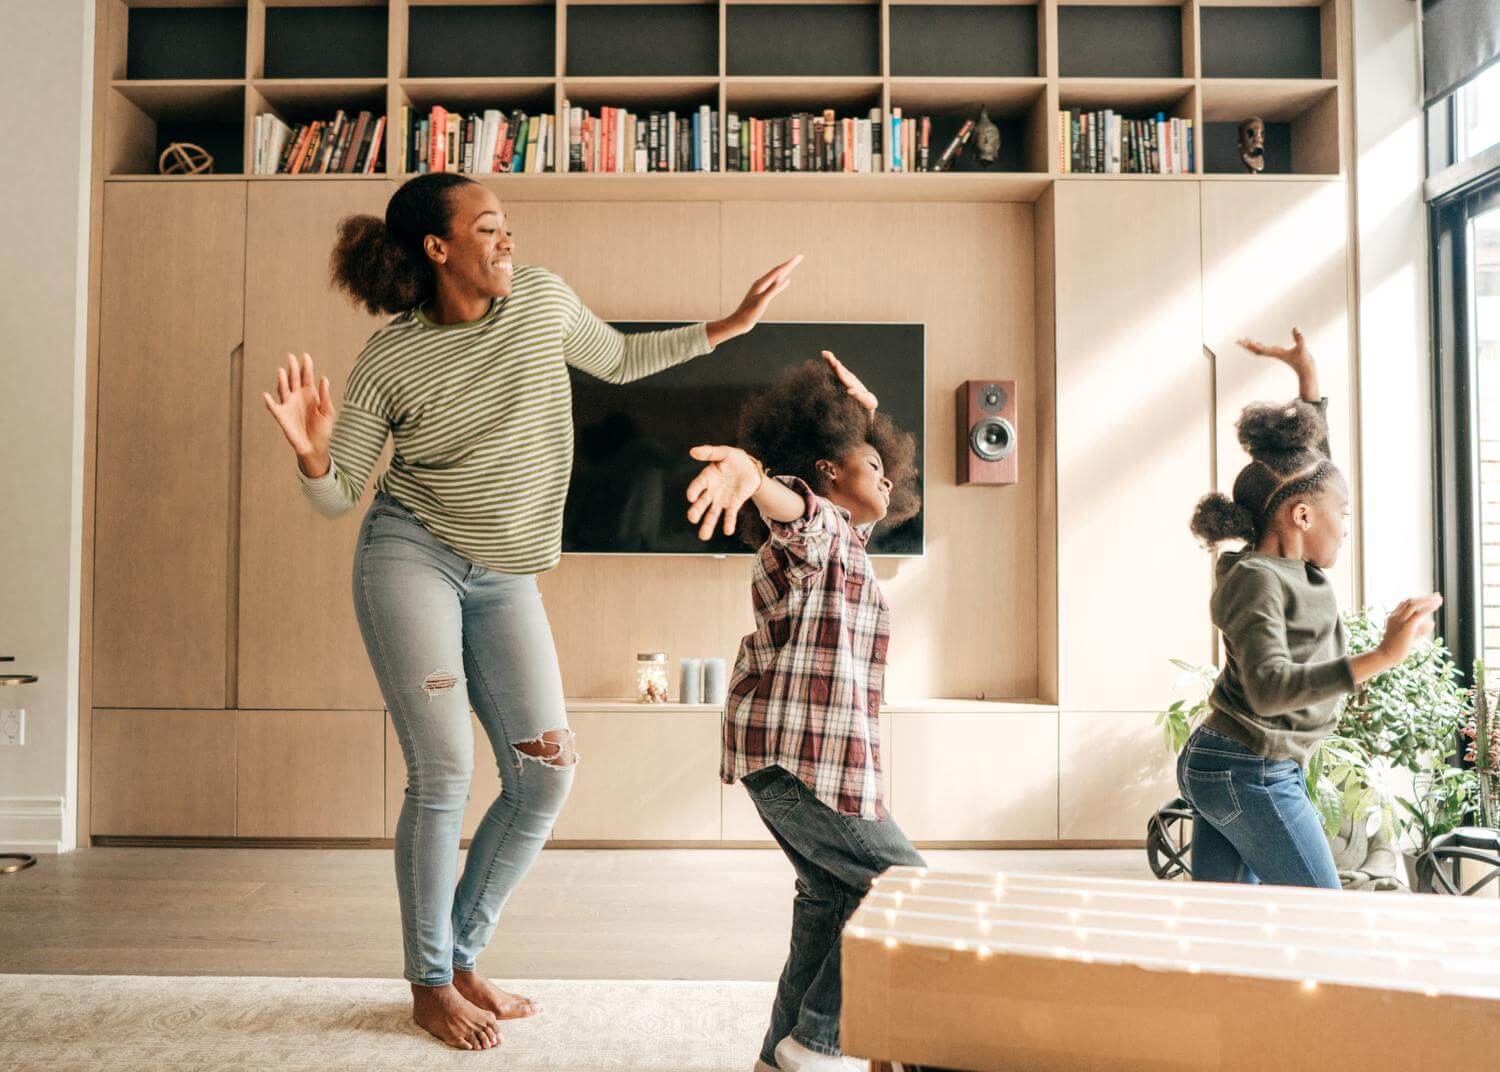 Black woman and two young black children dancing, smiling